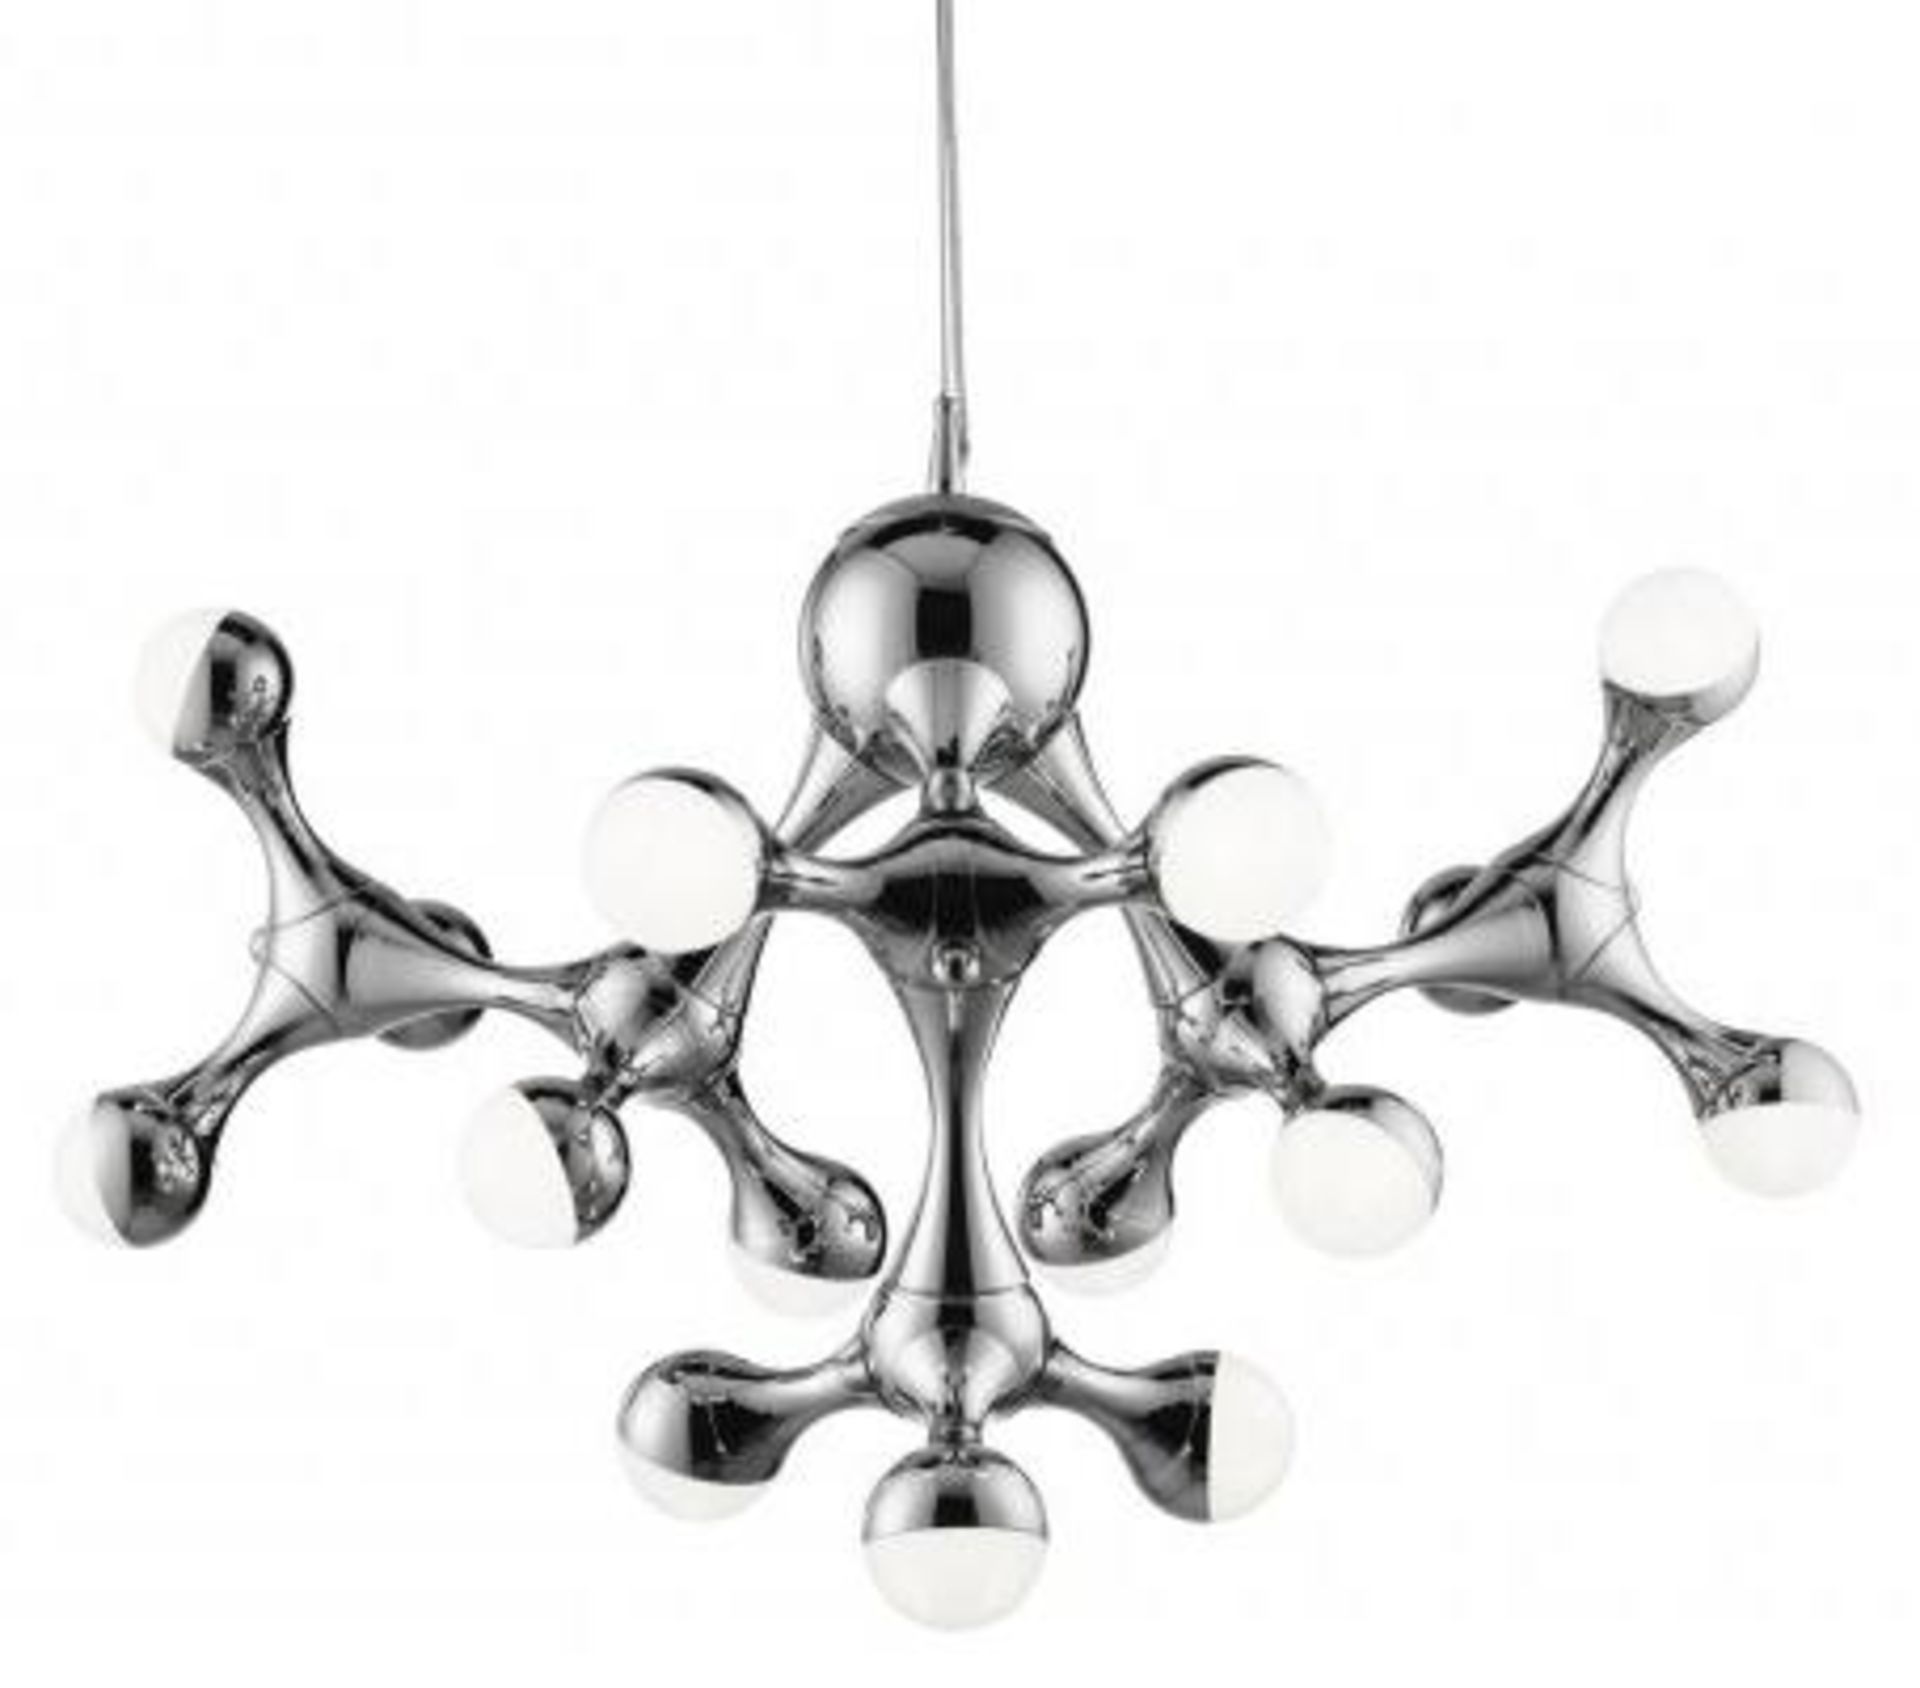 1 x DNA Chrome 15 LED Ceiling Light With Half Dome Shades - Contemporary European Design - Inspired